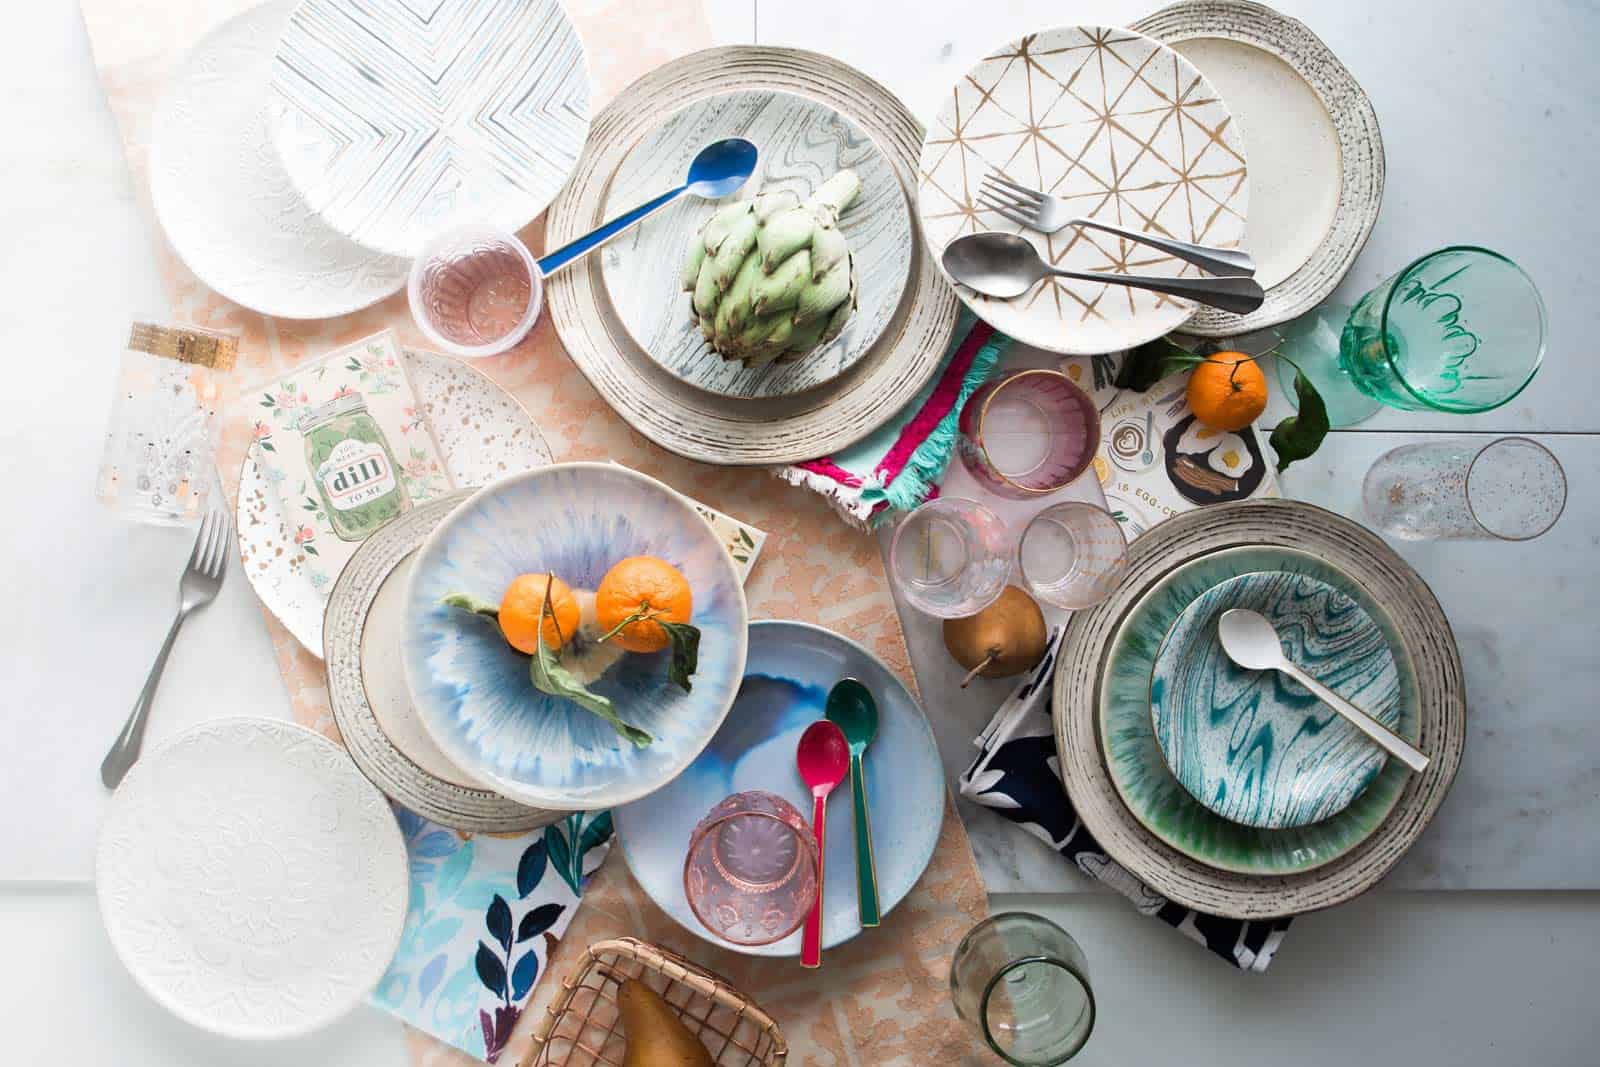 Where and How to Find Unique Dishware to Fit Your Life and Style